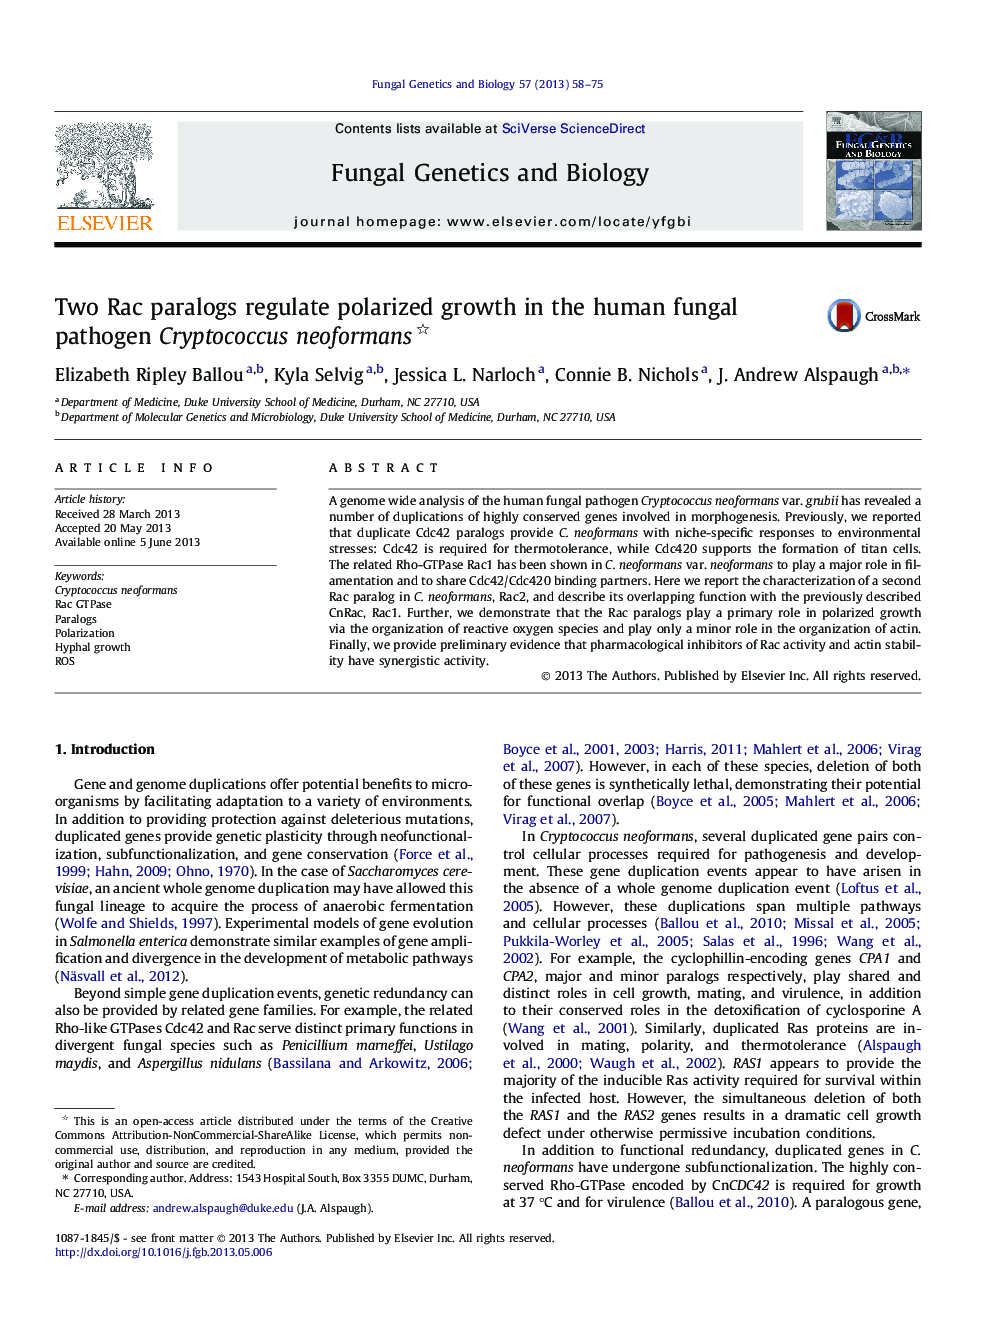 Two Rac paralogs regulate polarized growth in the human fungal pathogen Cryptococcus neoformans